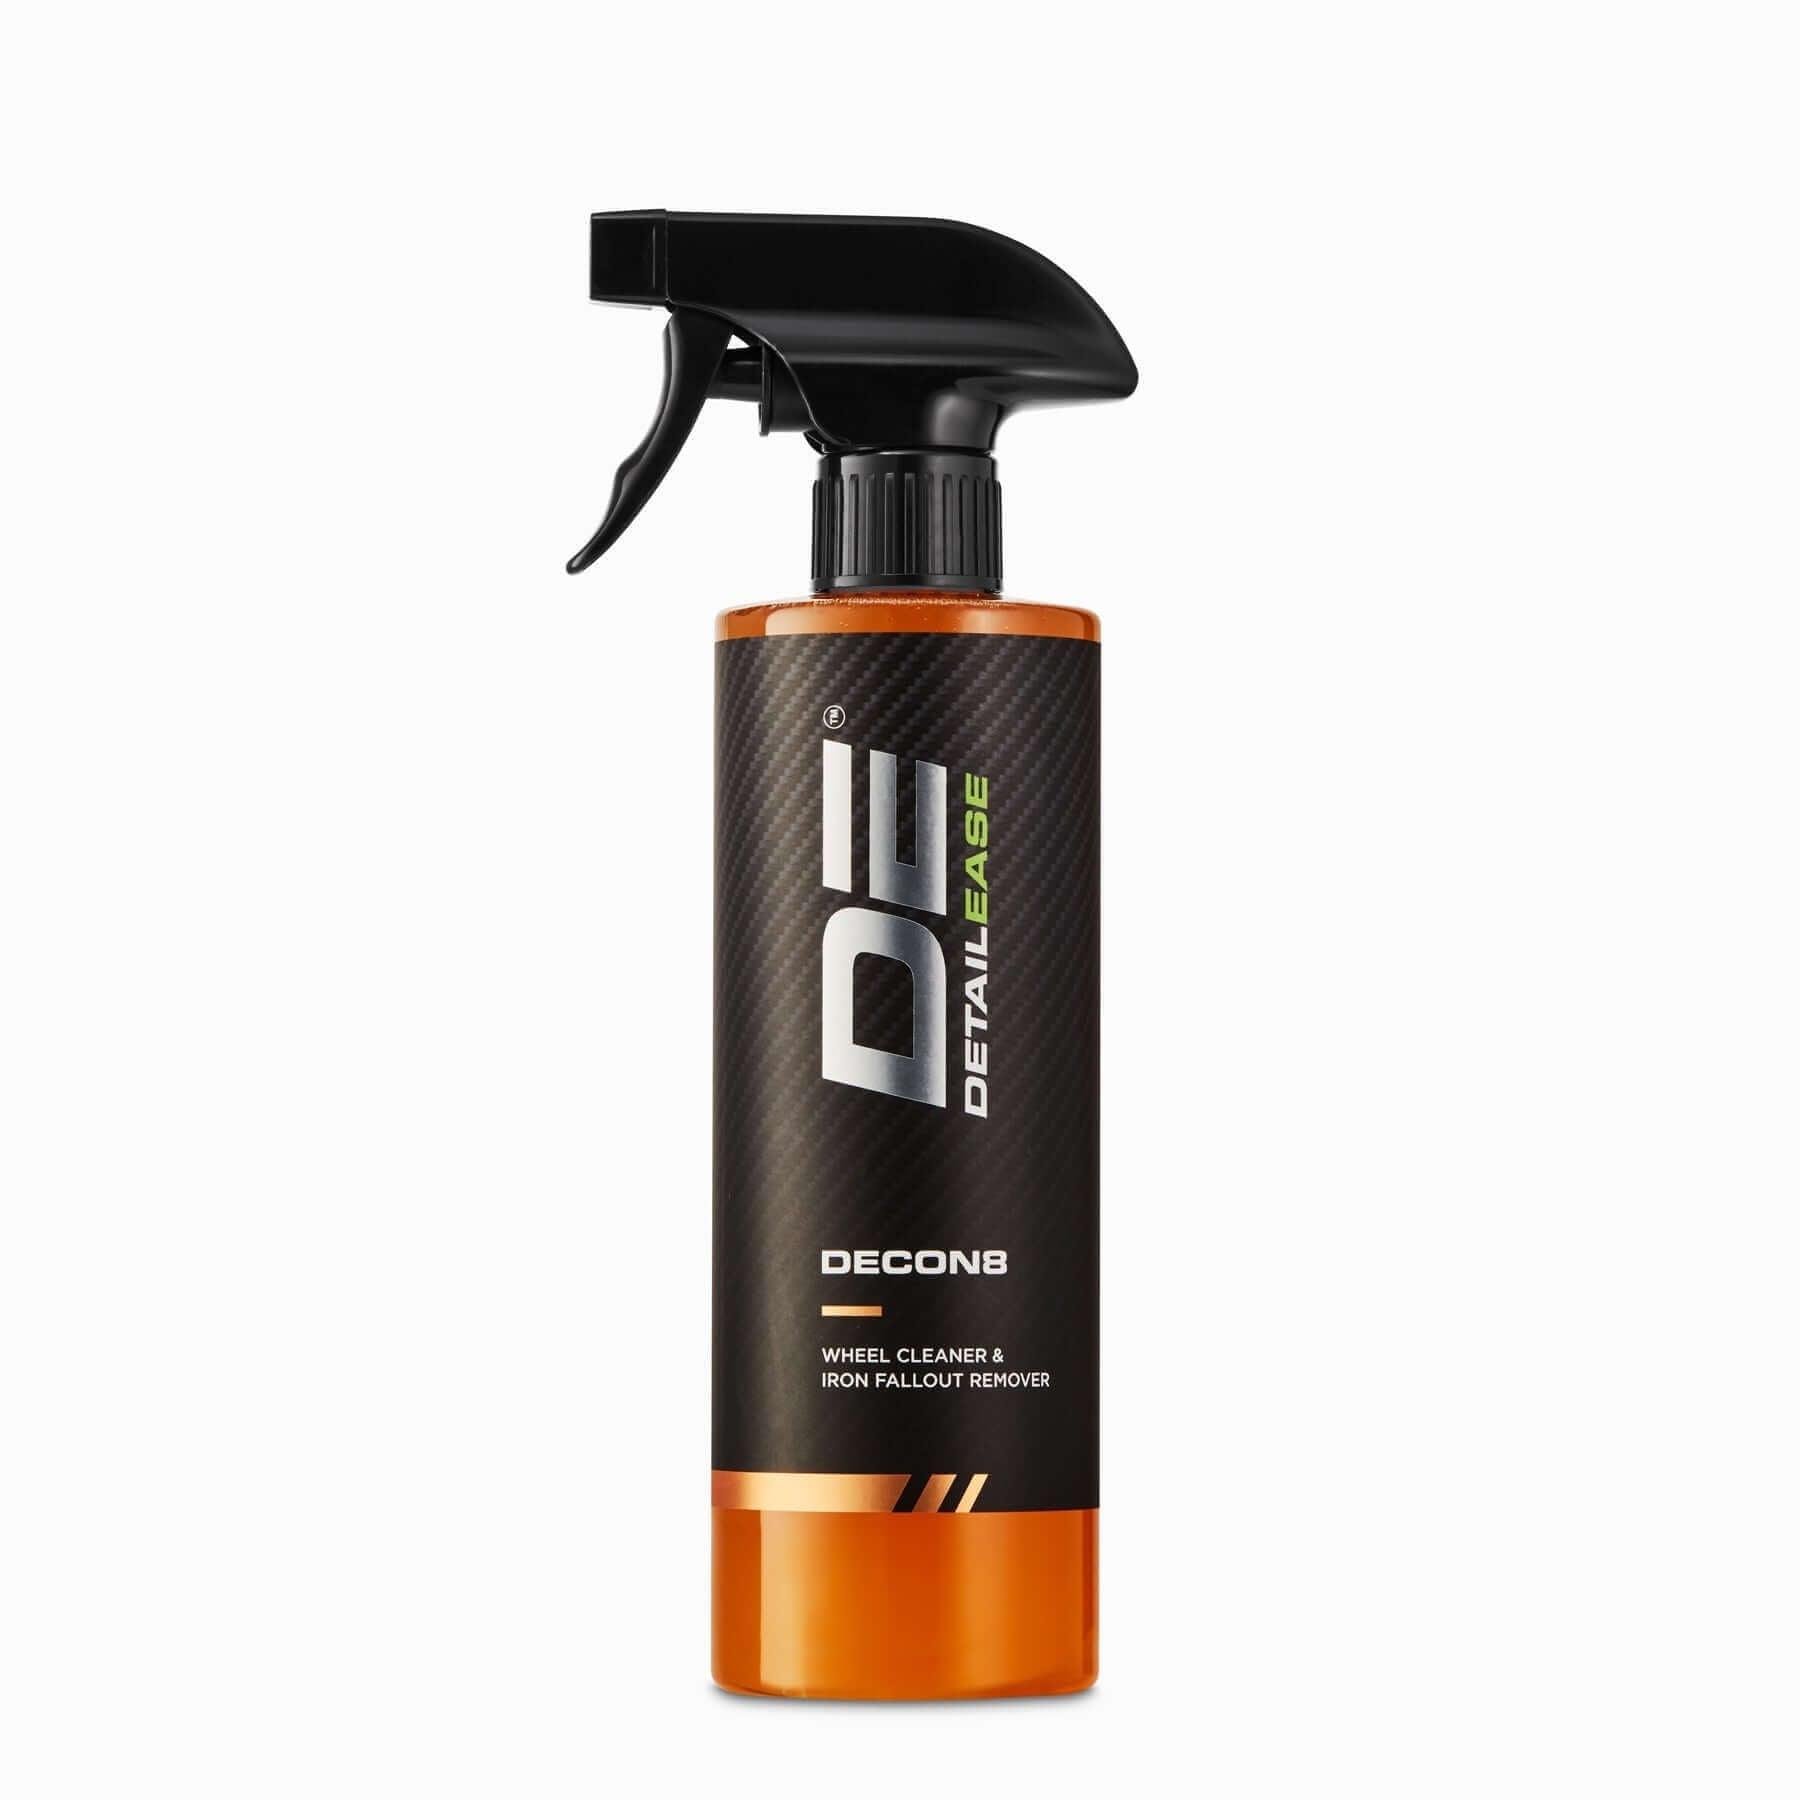 Detail Ease | Detail Ease Decon8 - Wheel Cleaner & Iron Fallout Remover at R 297.95